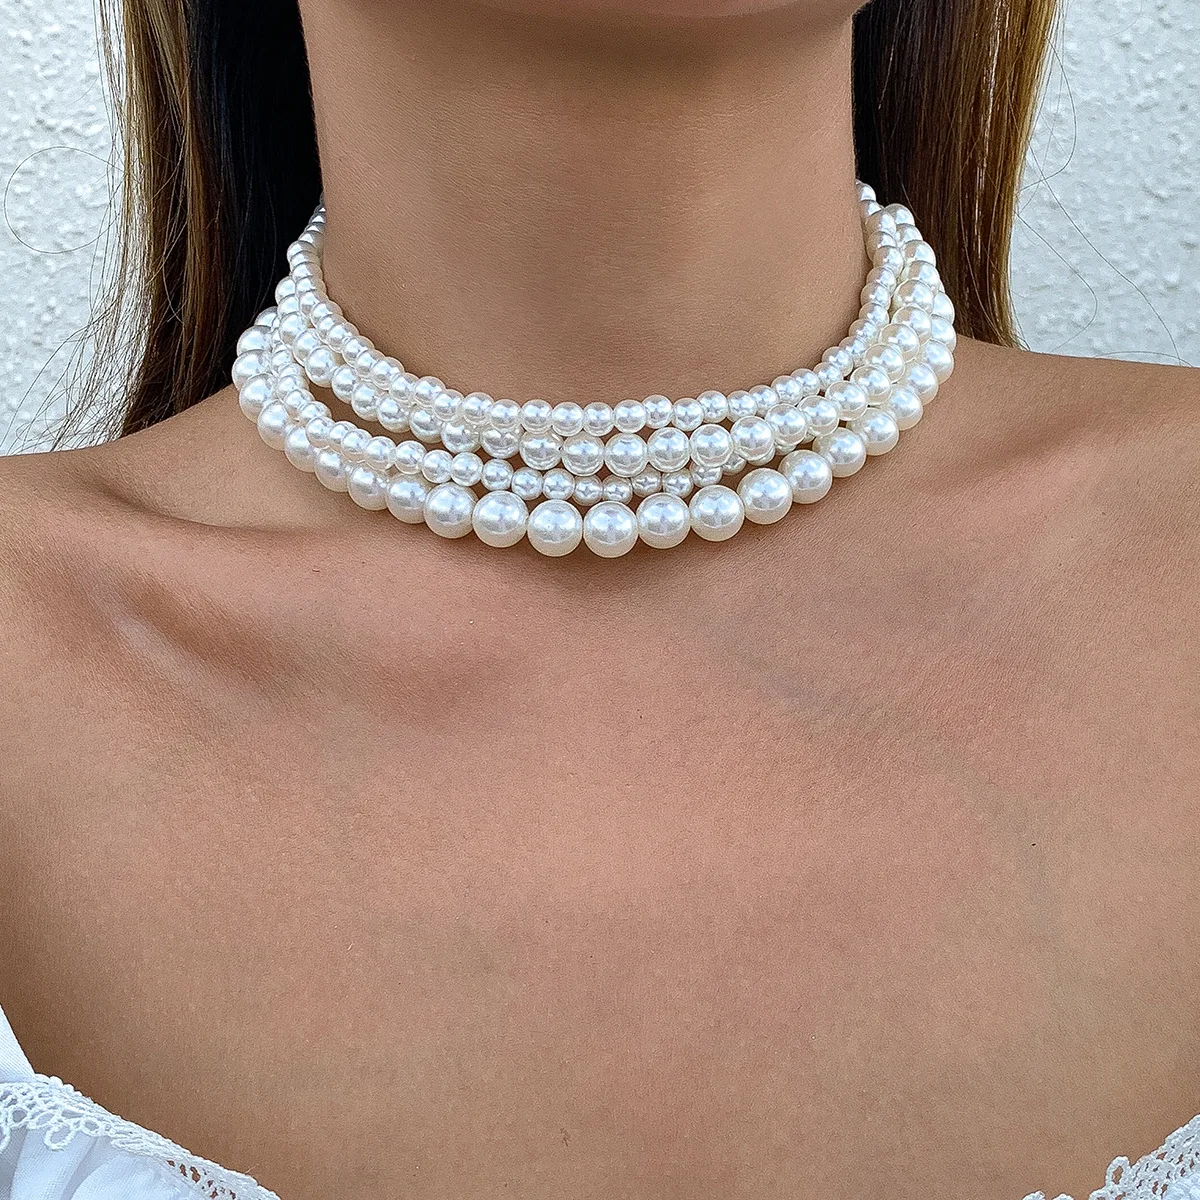 

IngeSight.Z Multi Layered Imitation Pearl Chain Short Choker Necklaces Vintage Toggle Lasso Collar Necklaces Female Neck Jewelry